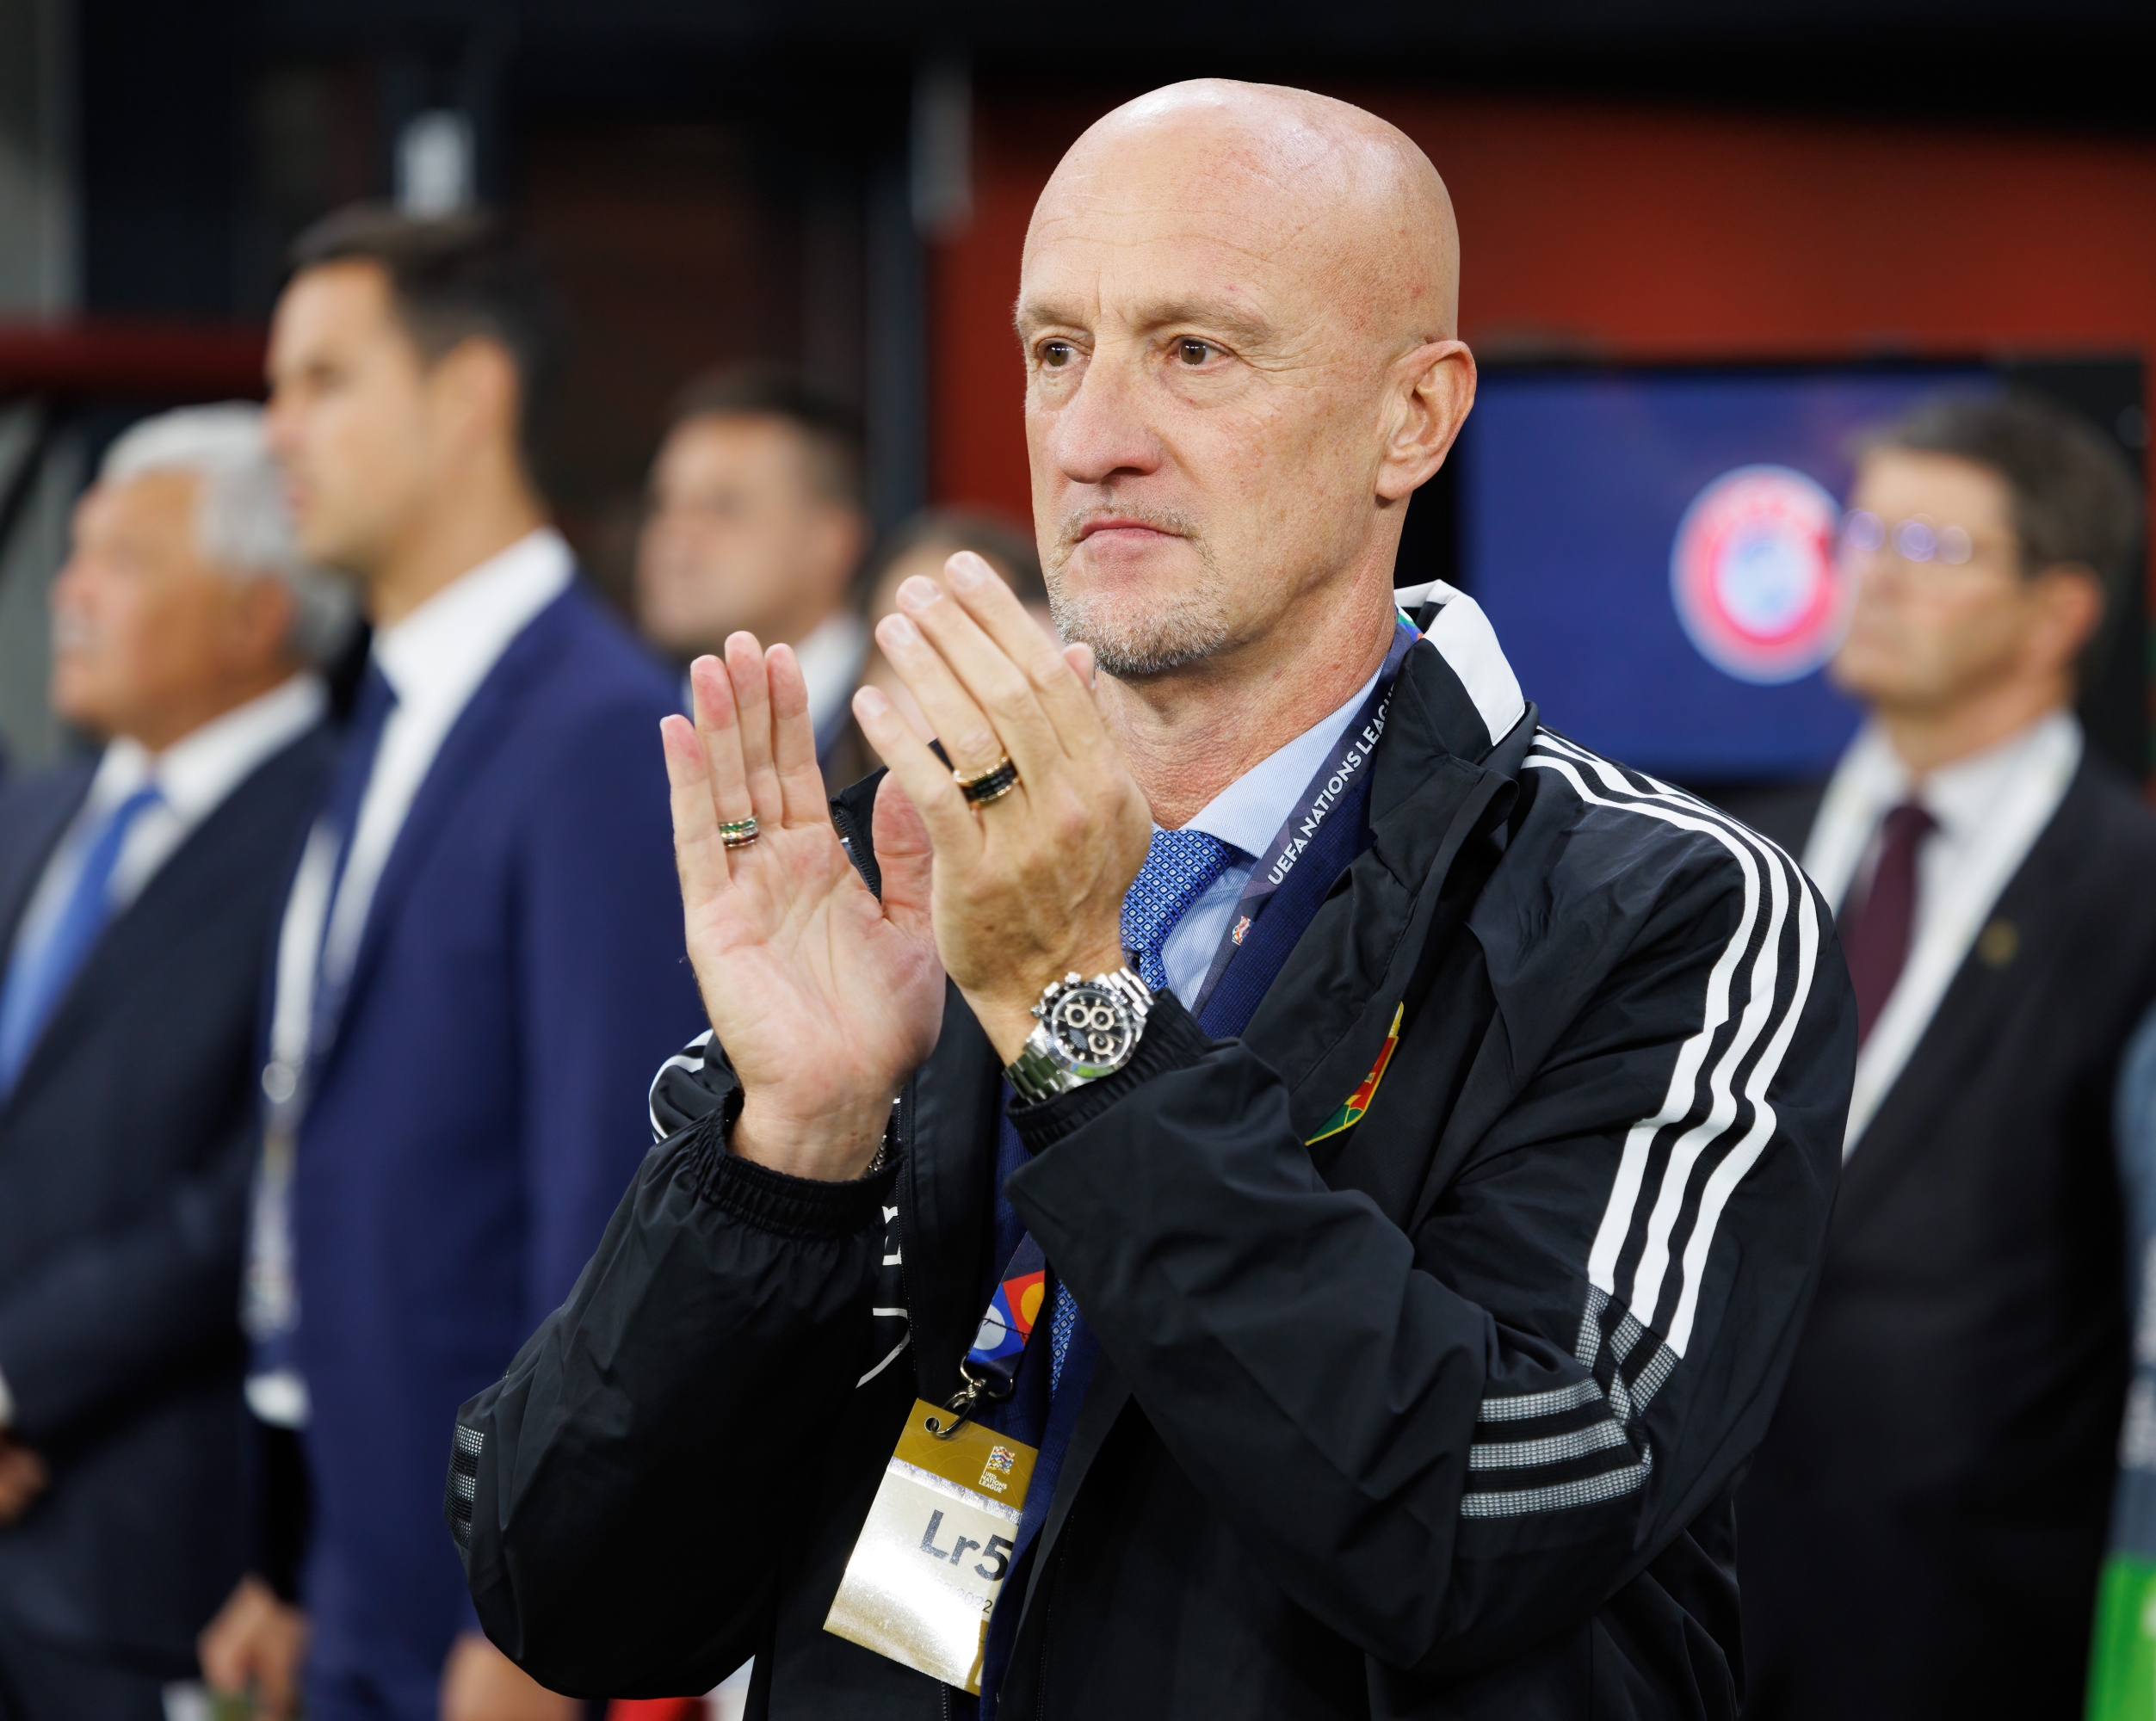 BUDAPEST, HUNGARY - SEPTEMBER 26: Marco Rossi, Manager of Hungary reacts prior to the UEFA Nations League League A Group 3 match between Hungary and Italy at Puskas Arena on September 26, 2022 in Budapest, Hungary. (Photo by Laszlo Szirtesi/Getty Images)